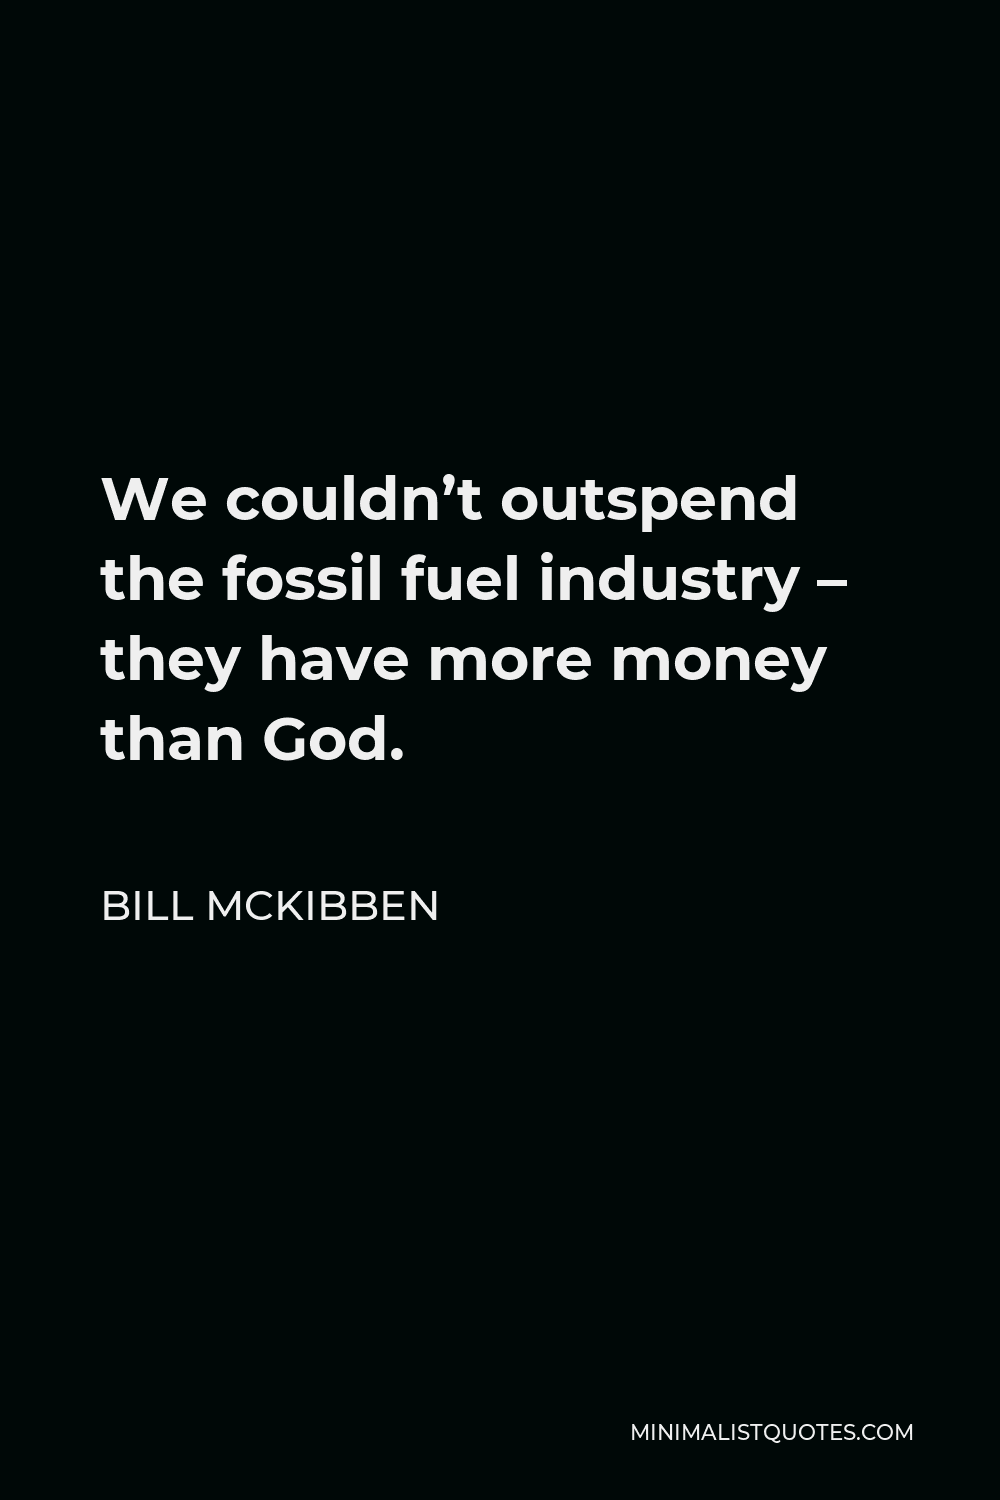 Bill McKibben Quote - We couldn’t outspend the fossil fuel industry – they have more money than God.